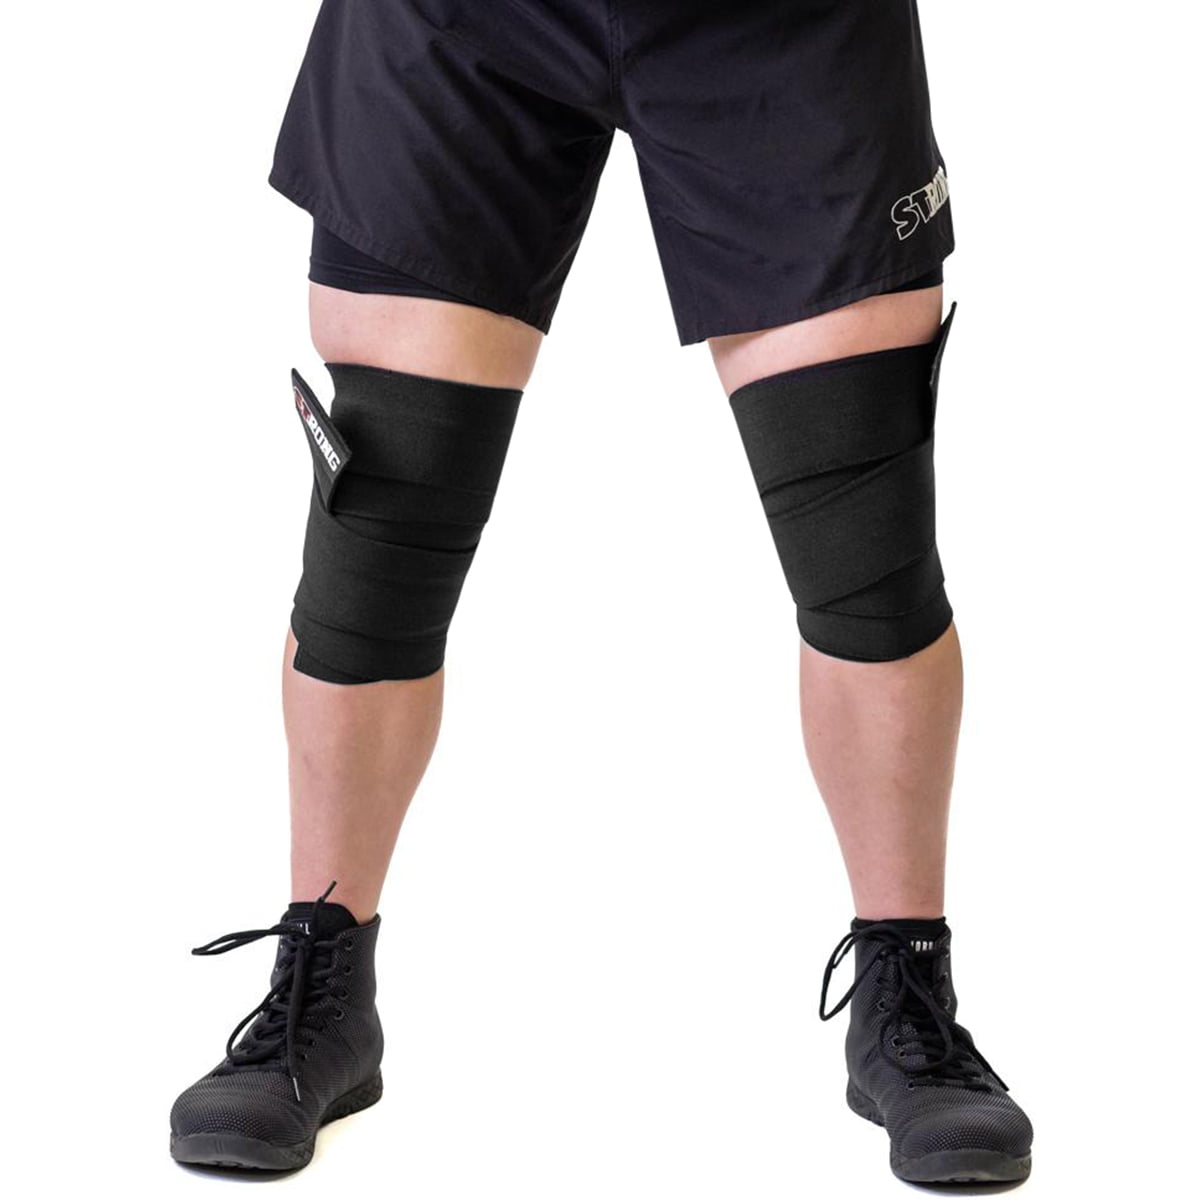 Sling Shot STrong Knee Wraps by Mark Bell - 3.0m 